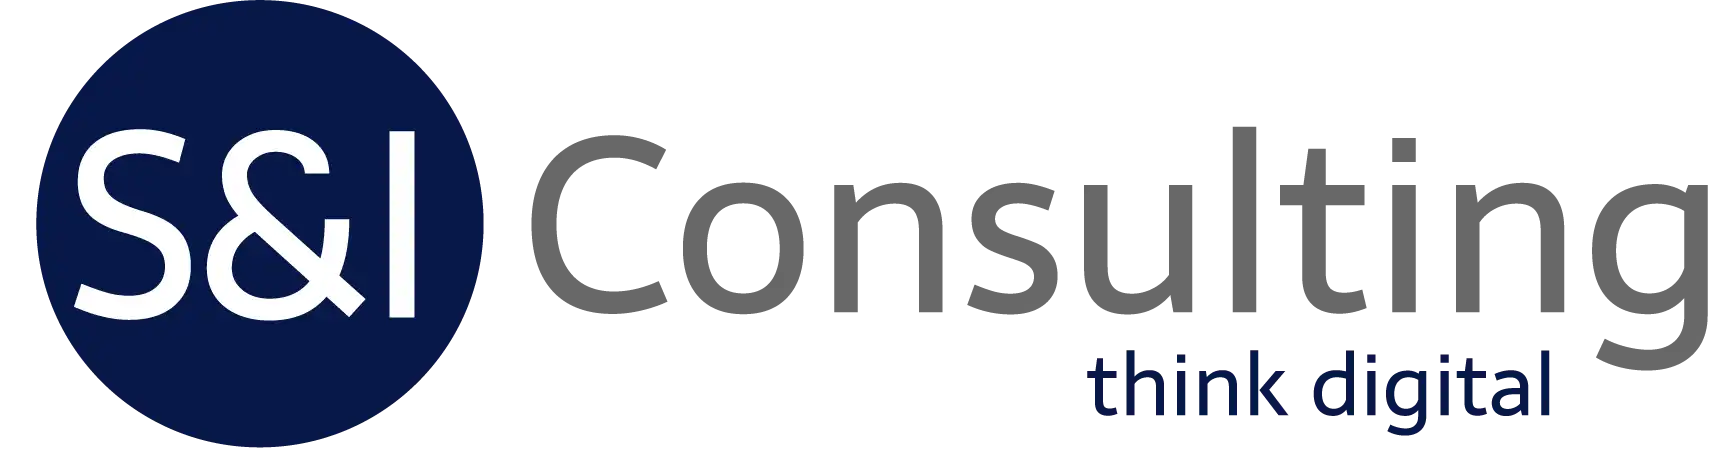 2786_350_40_si-consulting_logo.webp